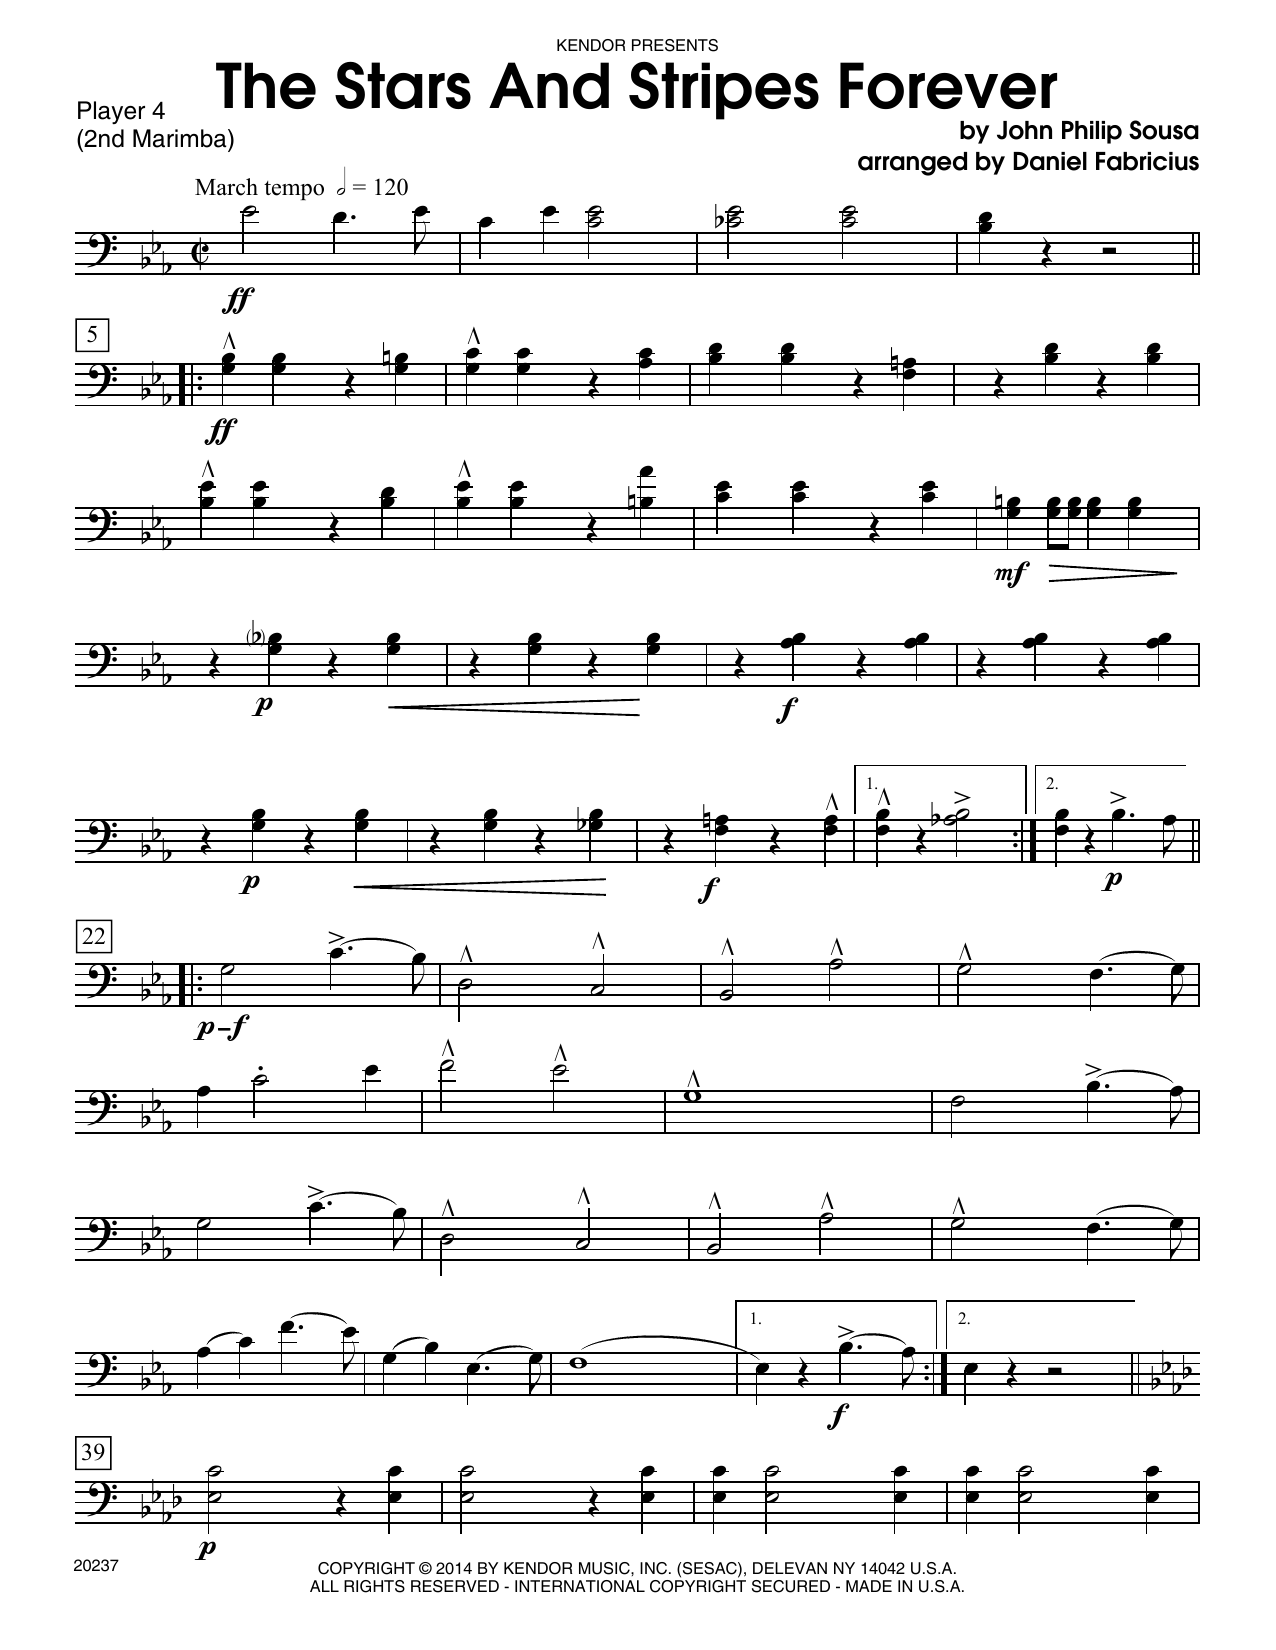 Daniel Fabricious The Stars And Stripes Forever - Percussion 4 sheet music notes and chords. Download Printable PDF.